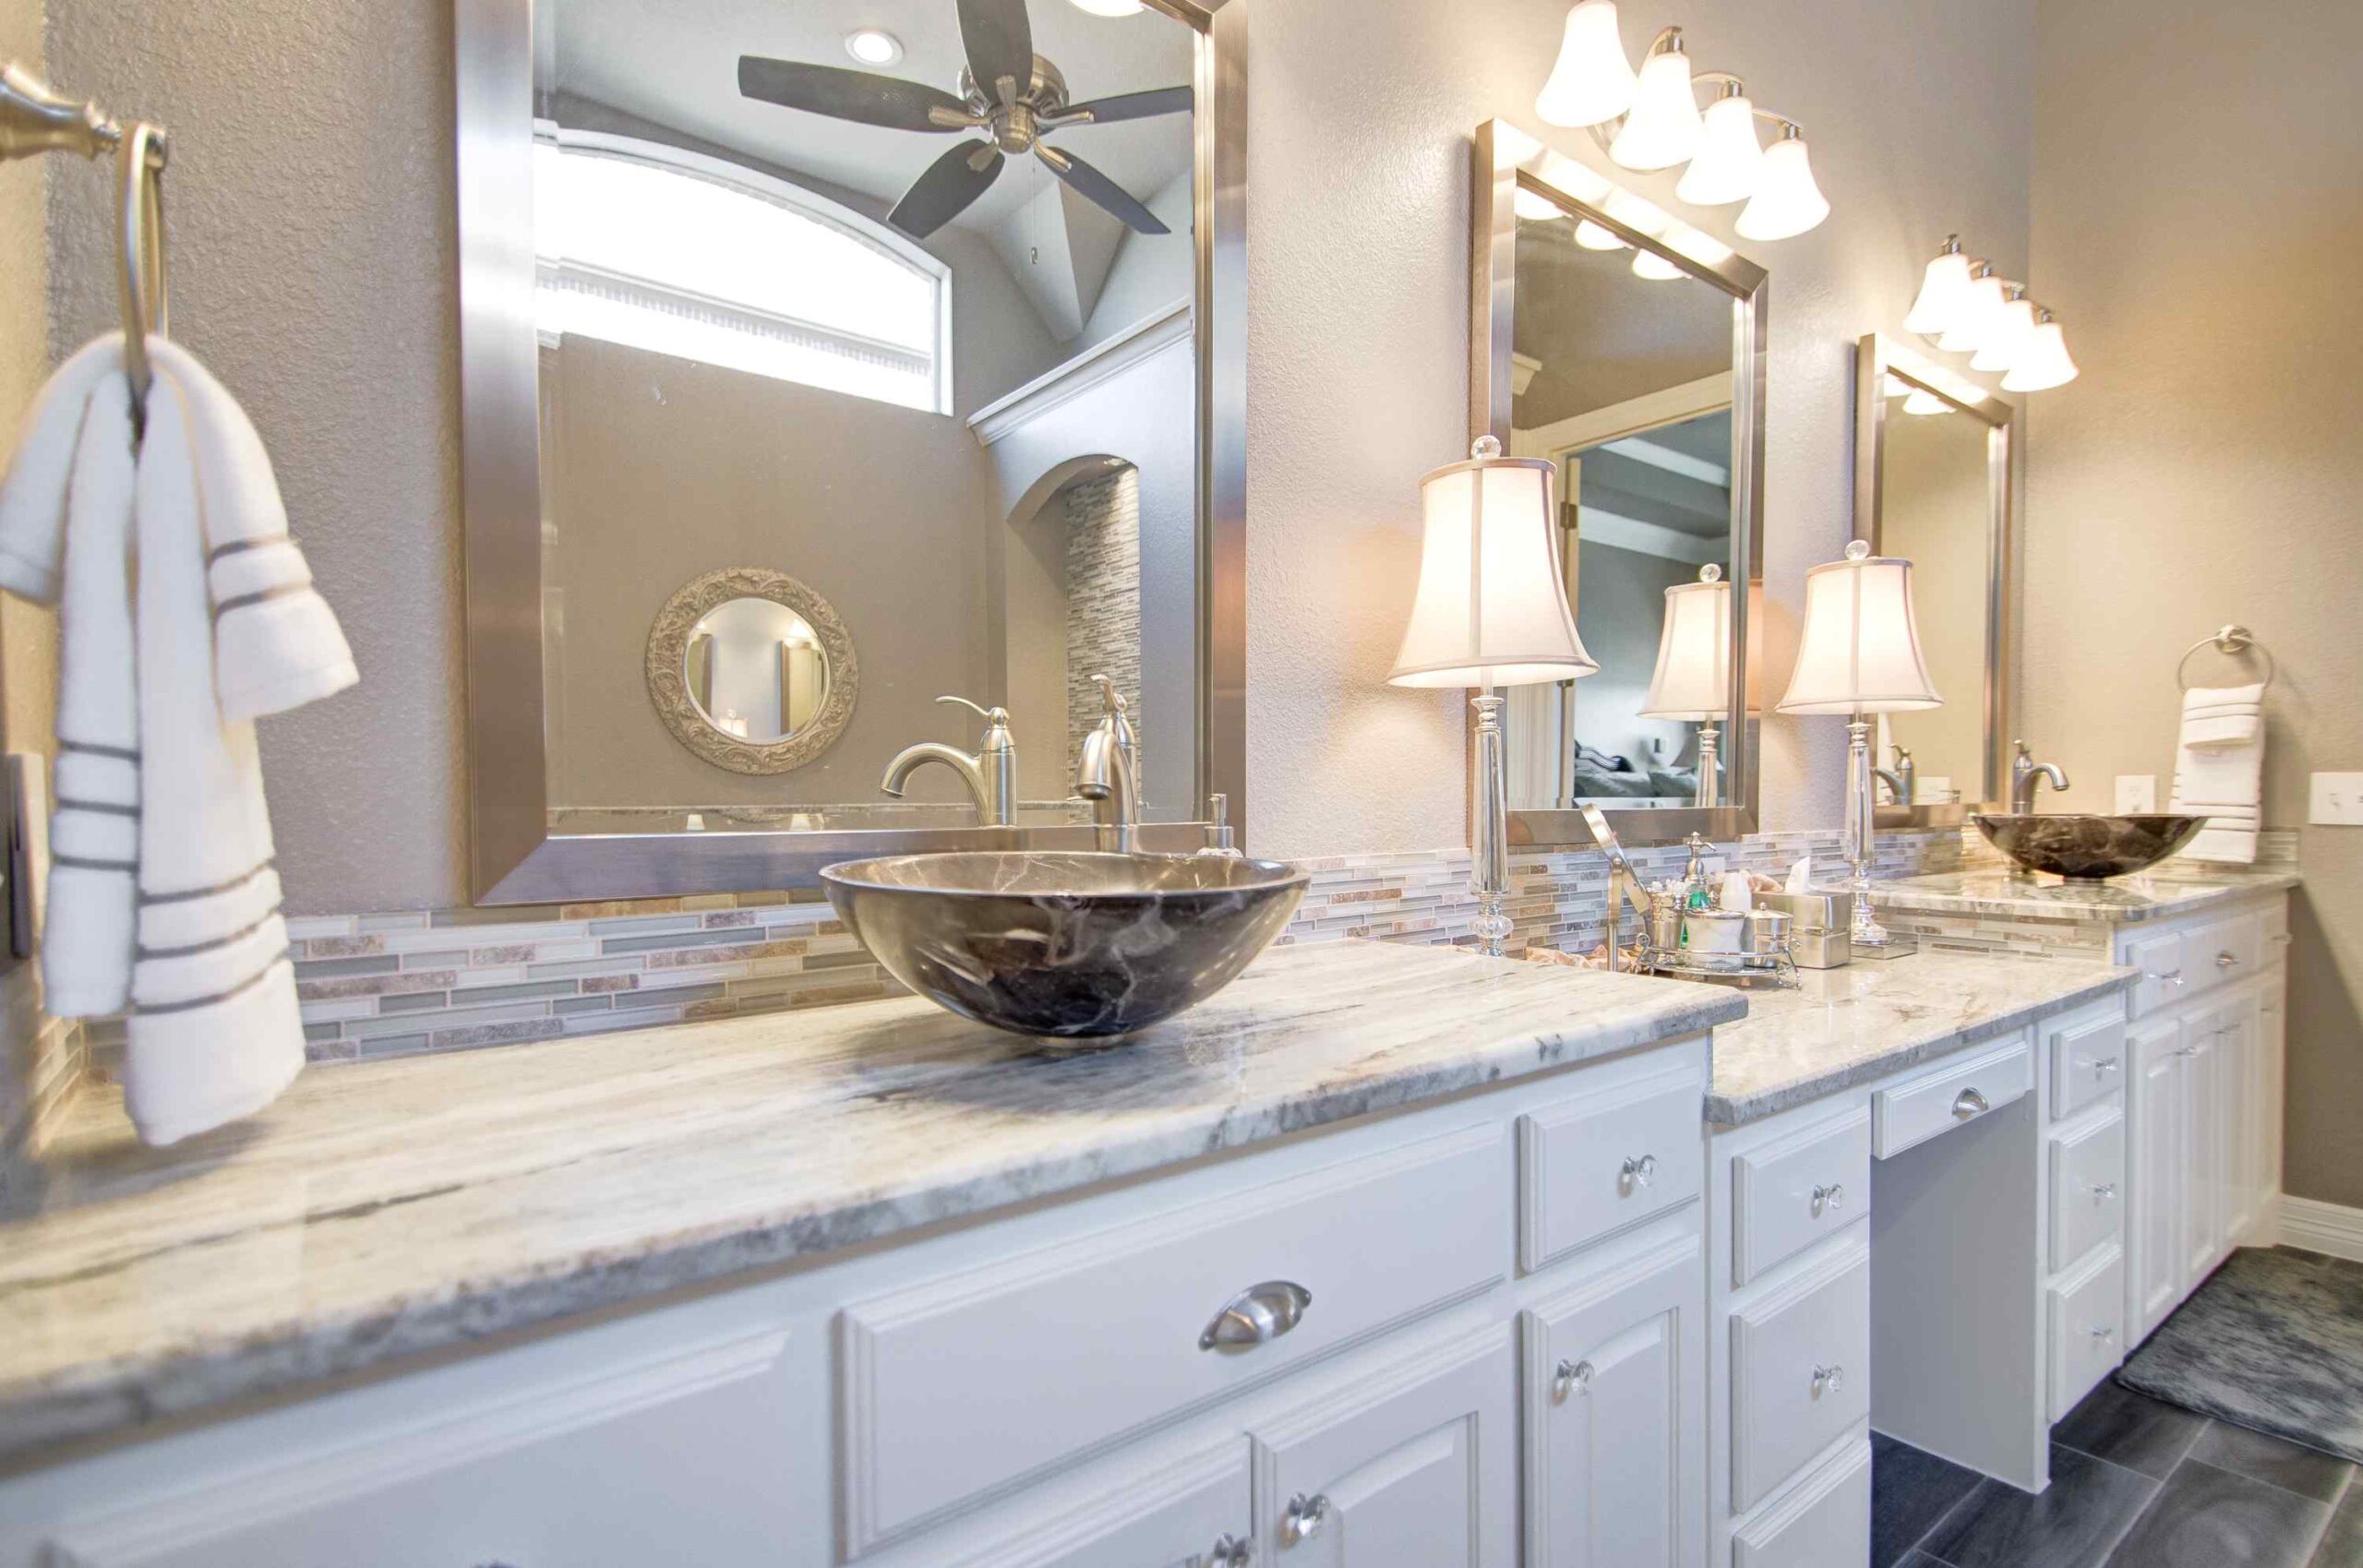 Modern Blu bathrooms marble counters - Also offering Basement Remodeling in Flower Mound TX